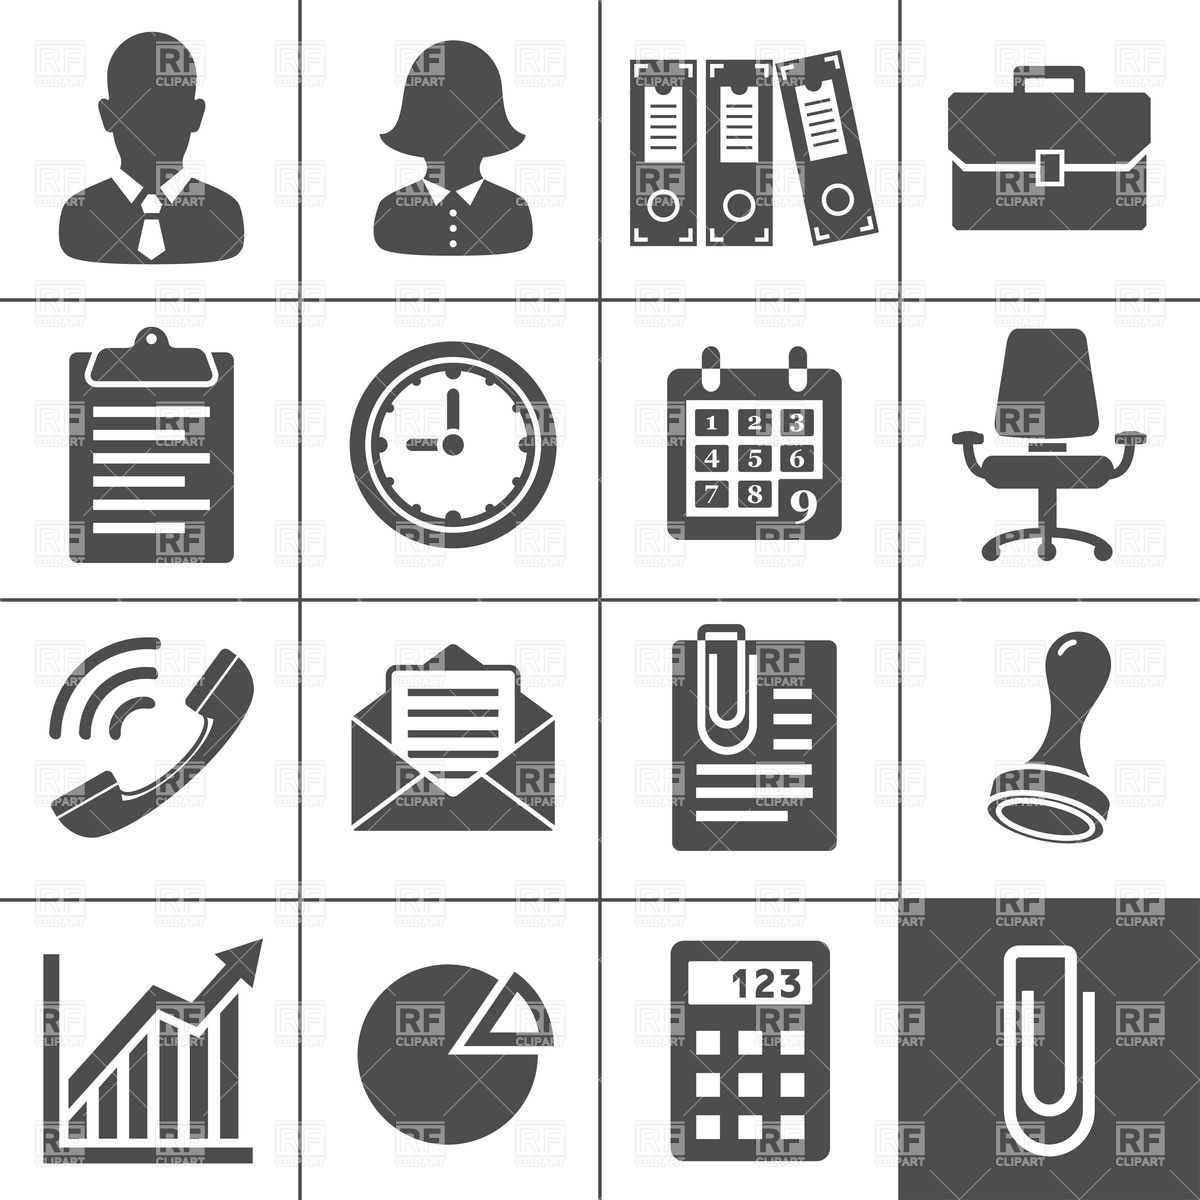 Icons Simplus Series 5951 Business Finance Download Royalty Free    